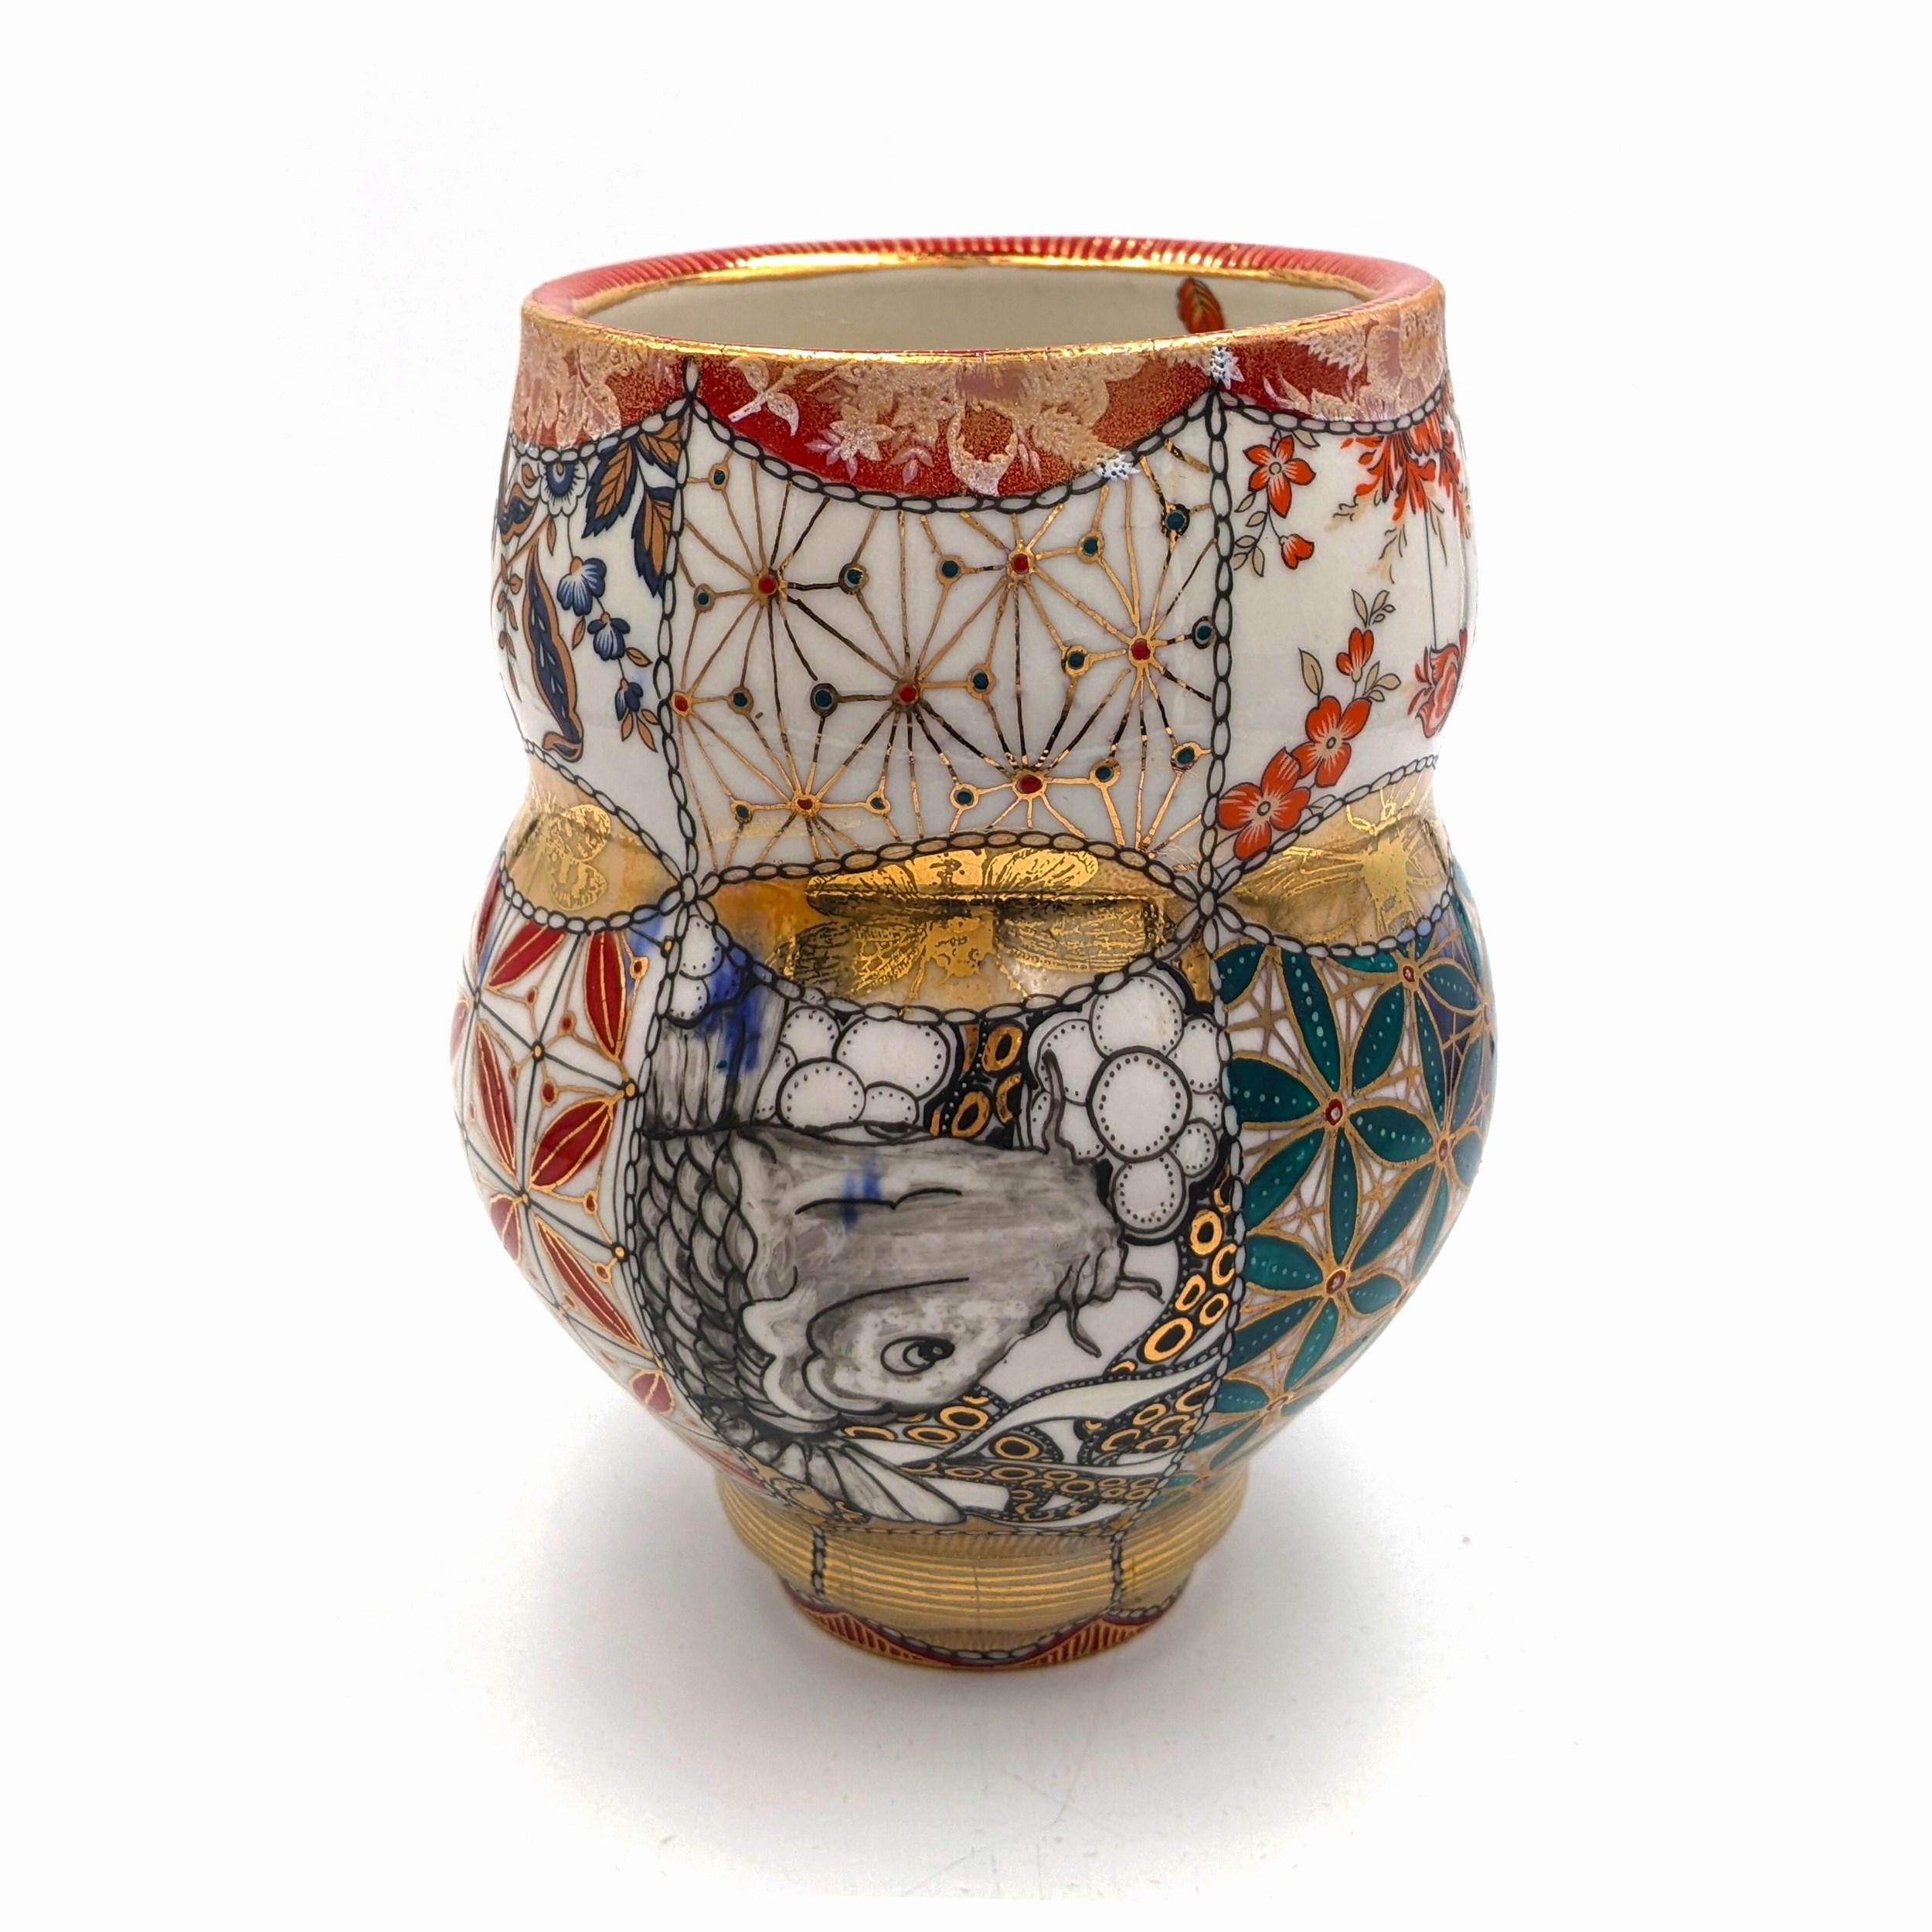 Melanie Sherman Figurative Sculpture - Small Vase with Koi (MADE TO ORDER) (Hand-painted, hand-made, porcelain)